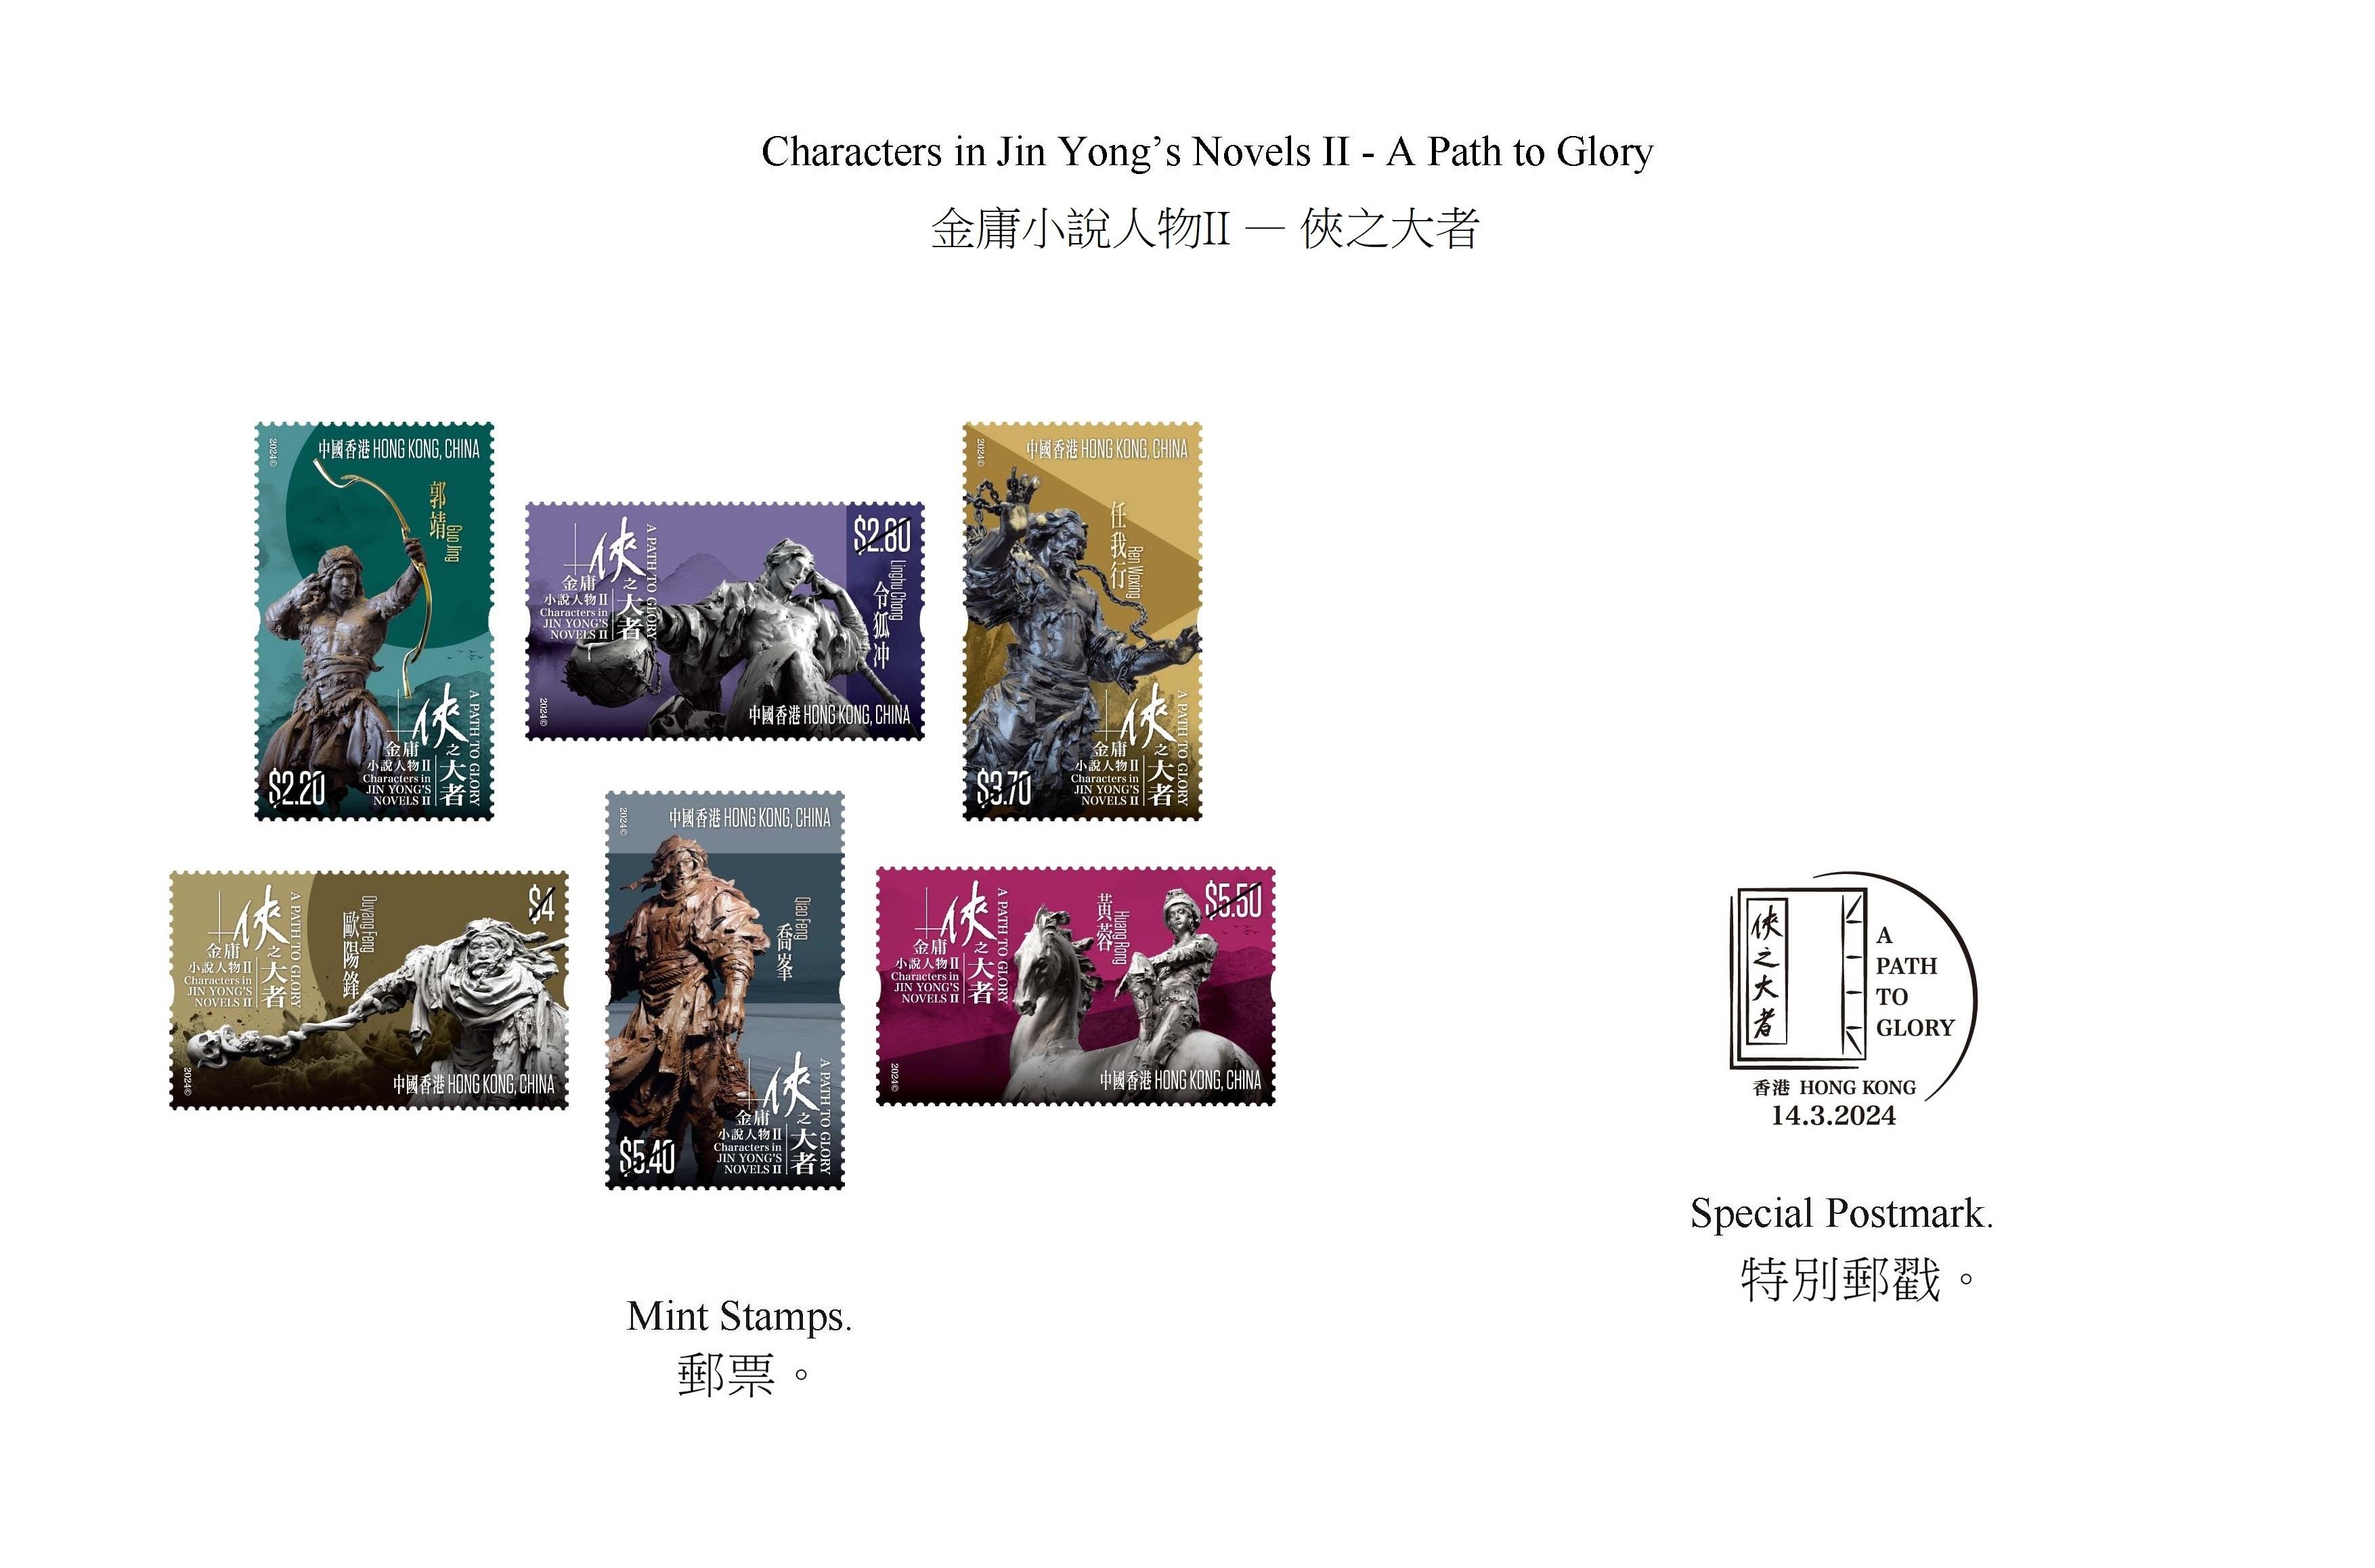 Hongkong Post will launch a special stamp issue and associated philatelic products on the theme of "Characters in Jin Yong's Novels II - A Path to Glory" on March 14 (Thursday). Photo shows the mint stamps and the special postmark.
